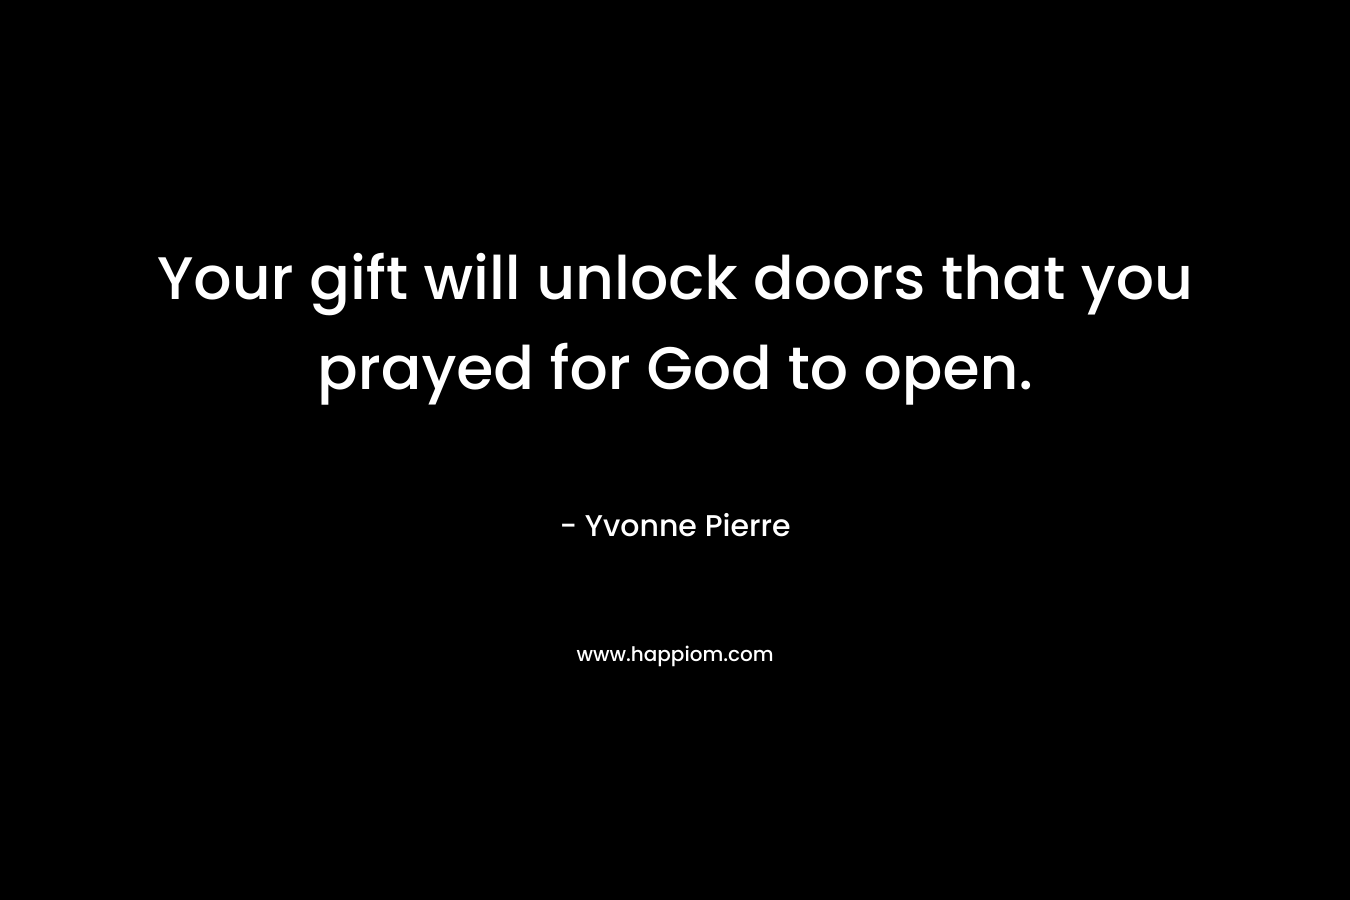 Your gift will unlock doors that you prayed for God to open. – Yvonne Pierre